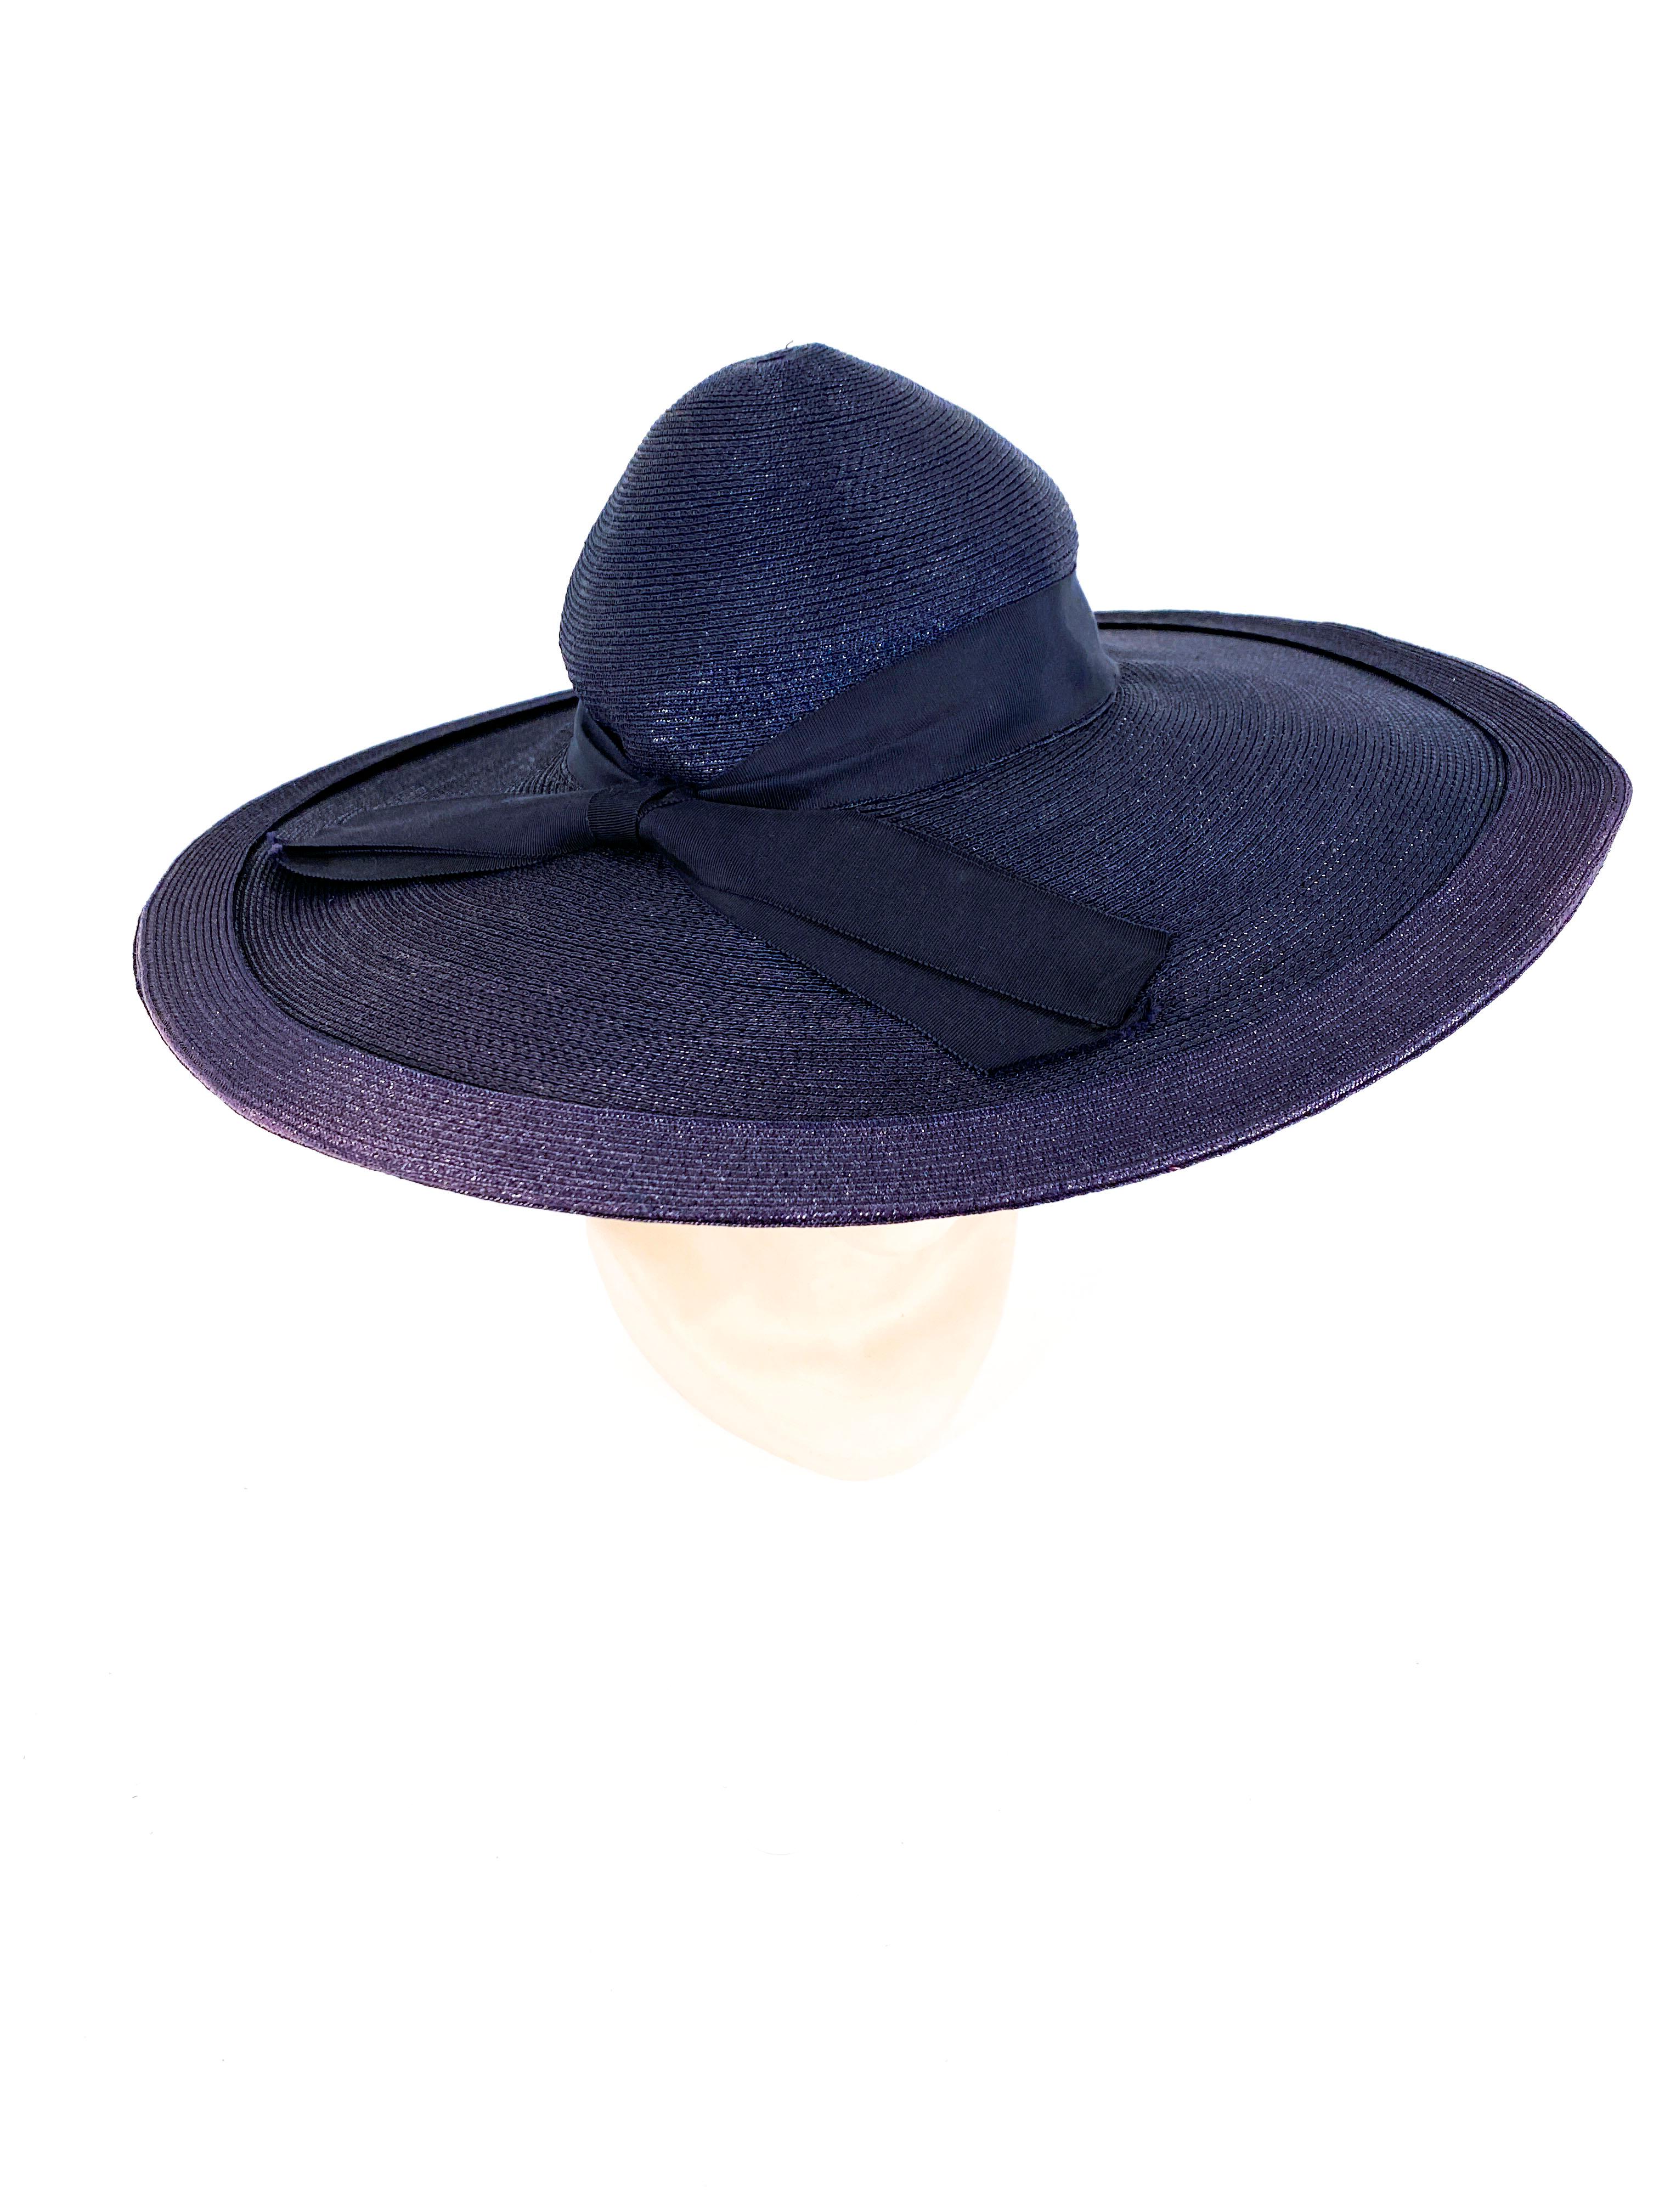 1940s Navy wide brimmed-hat made of a woven and coated straw. The wide brim is trimed with a secondary ring of straw, the high crown is adorned with a grosgrain ribbon, woven patterned button, and an enlarged bow. The crown is small as this hat is